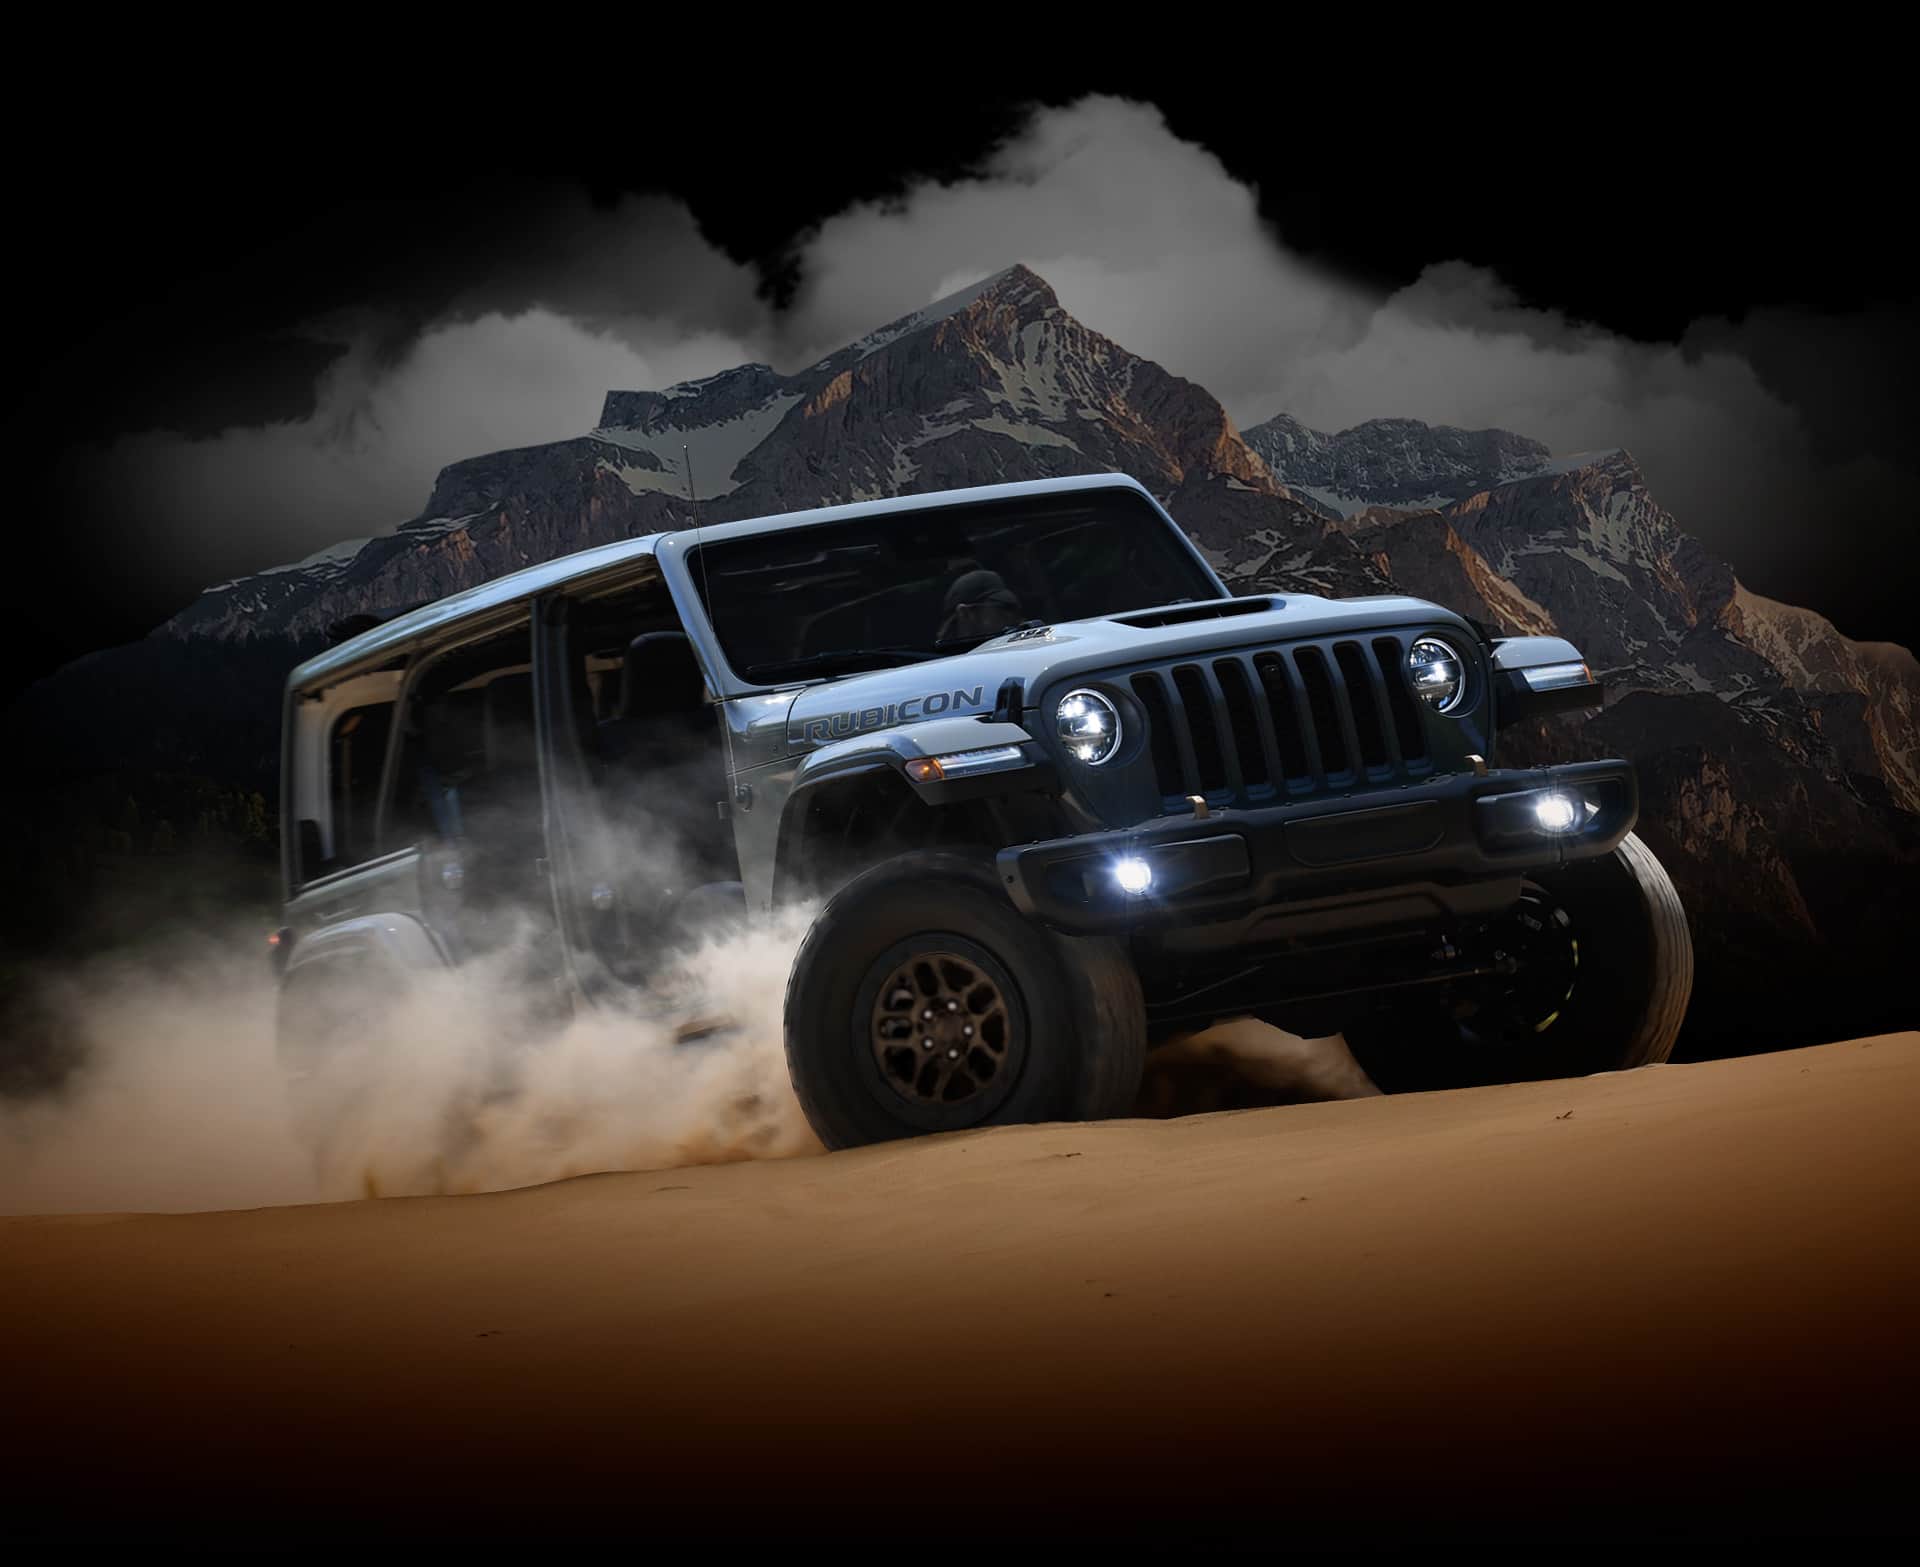 2022 Jeep® Wrangler Capability - Trail Rated For Offroad